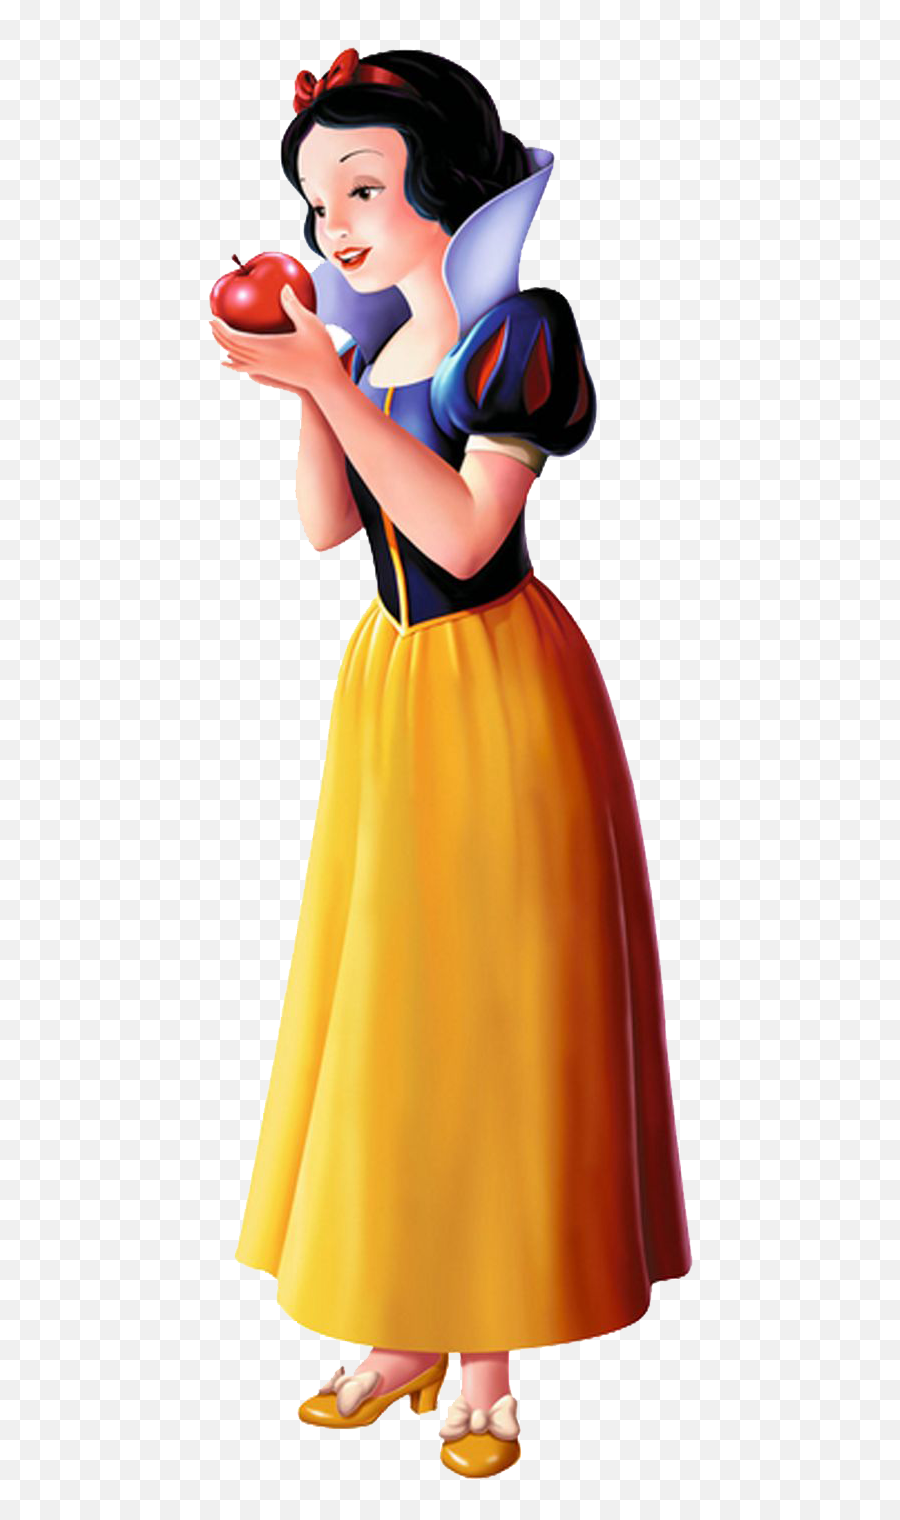 Snow White Png Transparent Images All - Snow White With Apple,White Dress Png